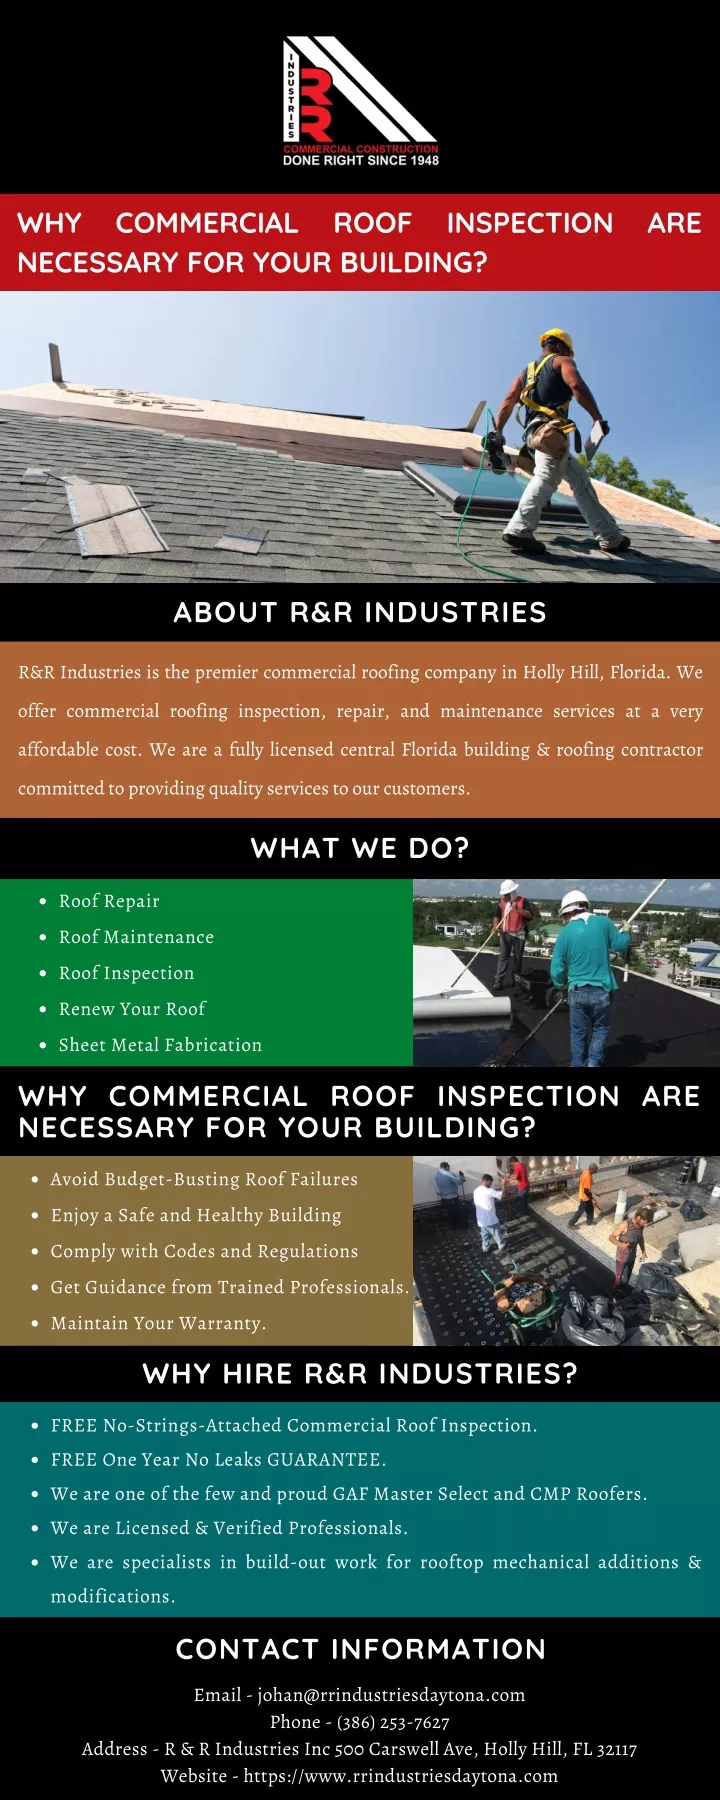 why commercial roof inspection are necessary